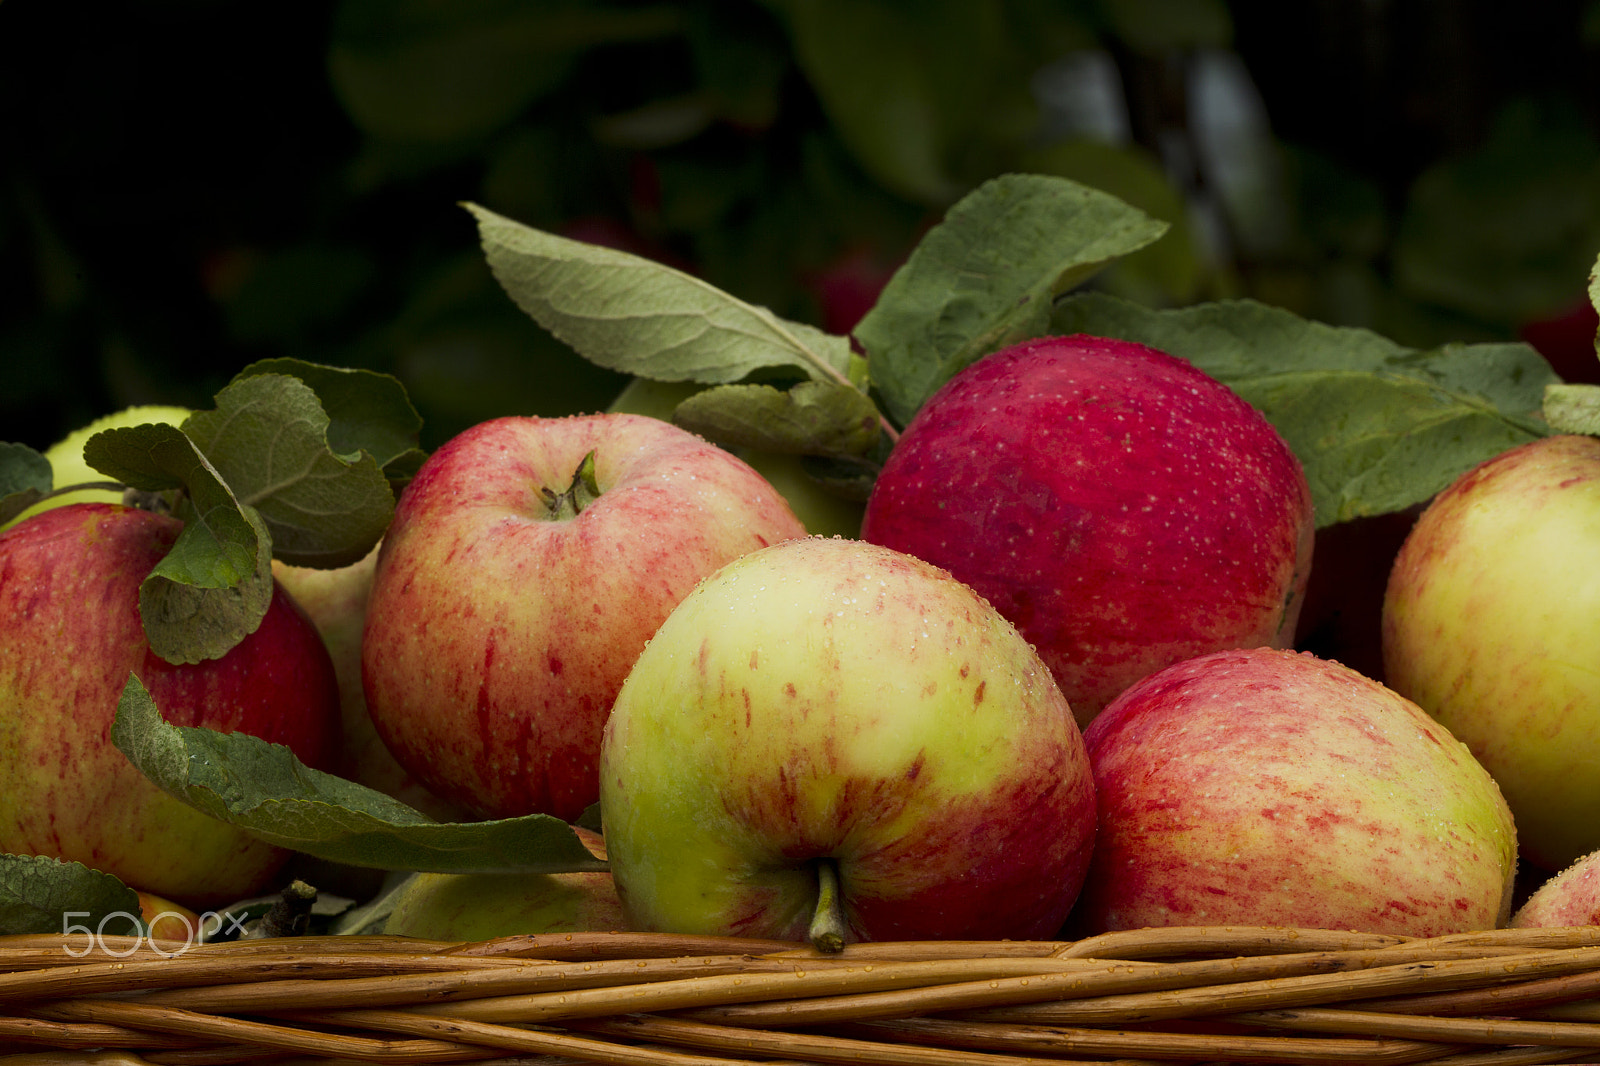 Canon EOS-1D Mark IV sample photo. Red apples in wooden wicker basket photography